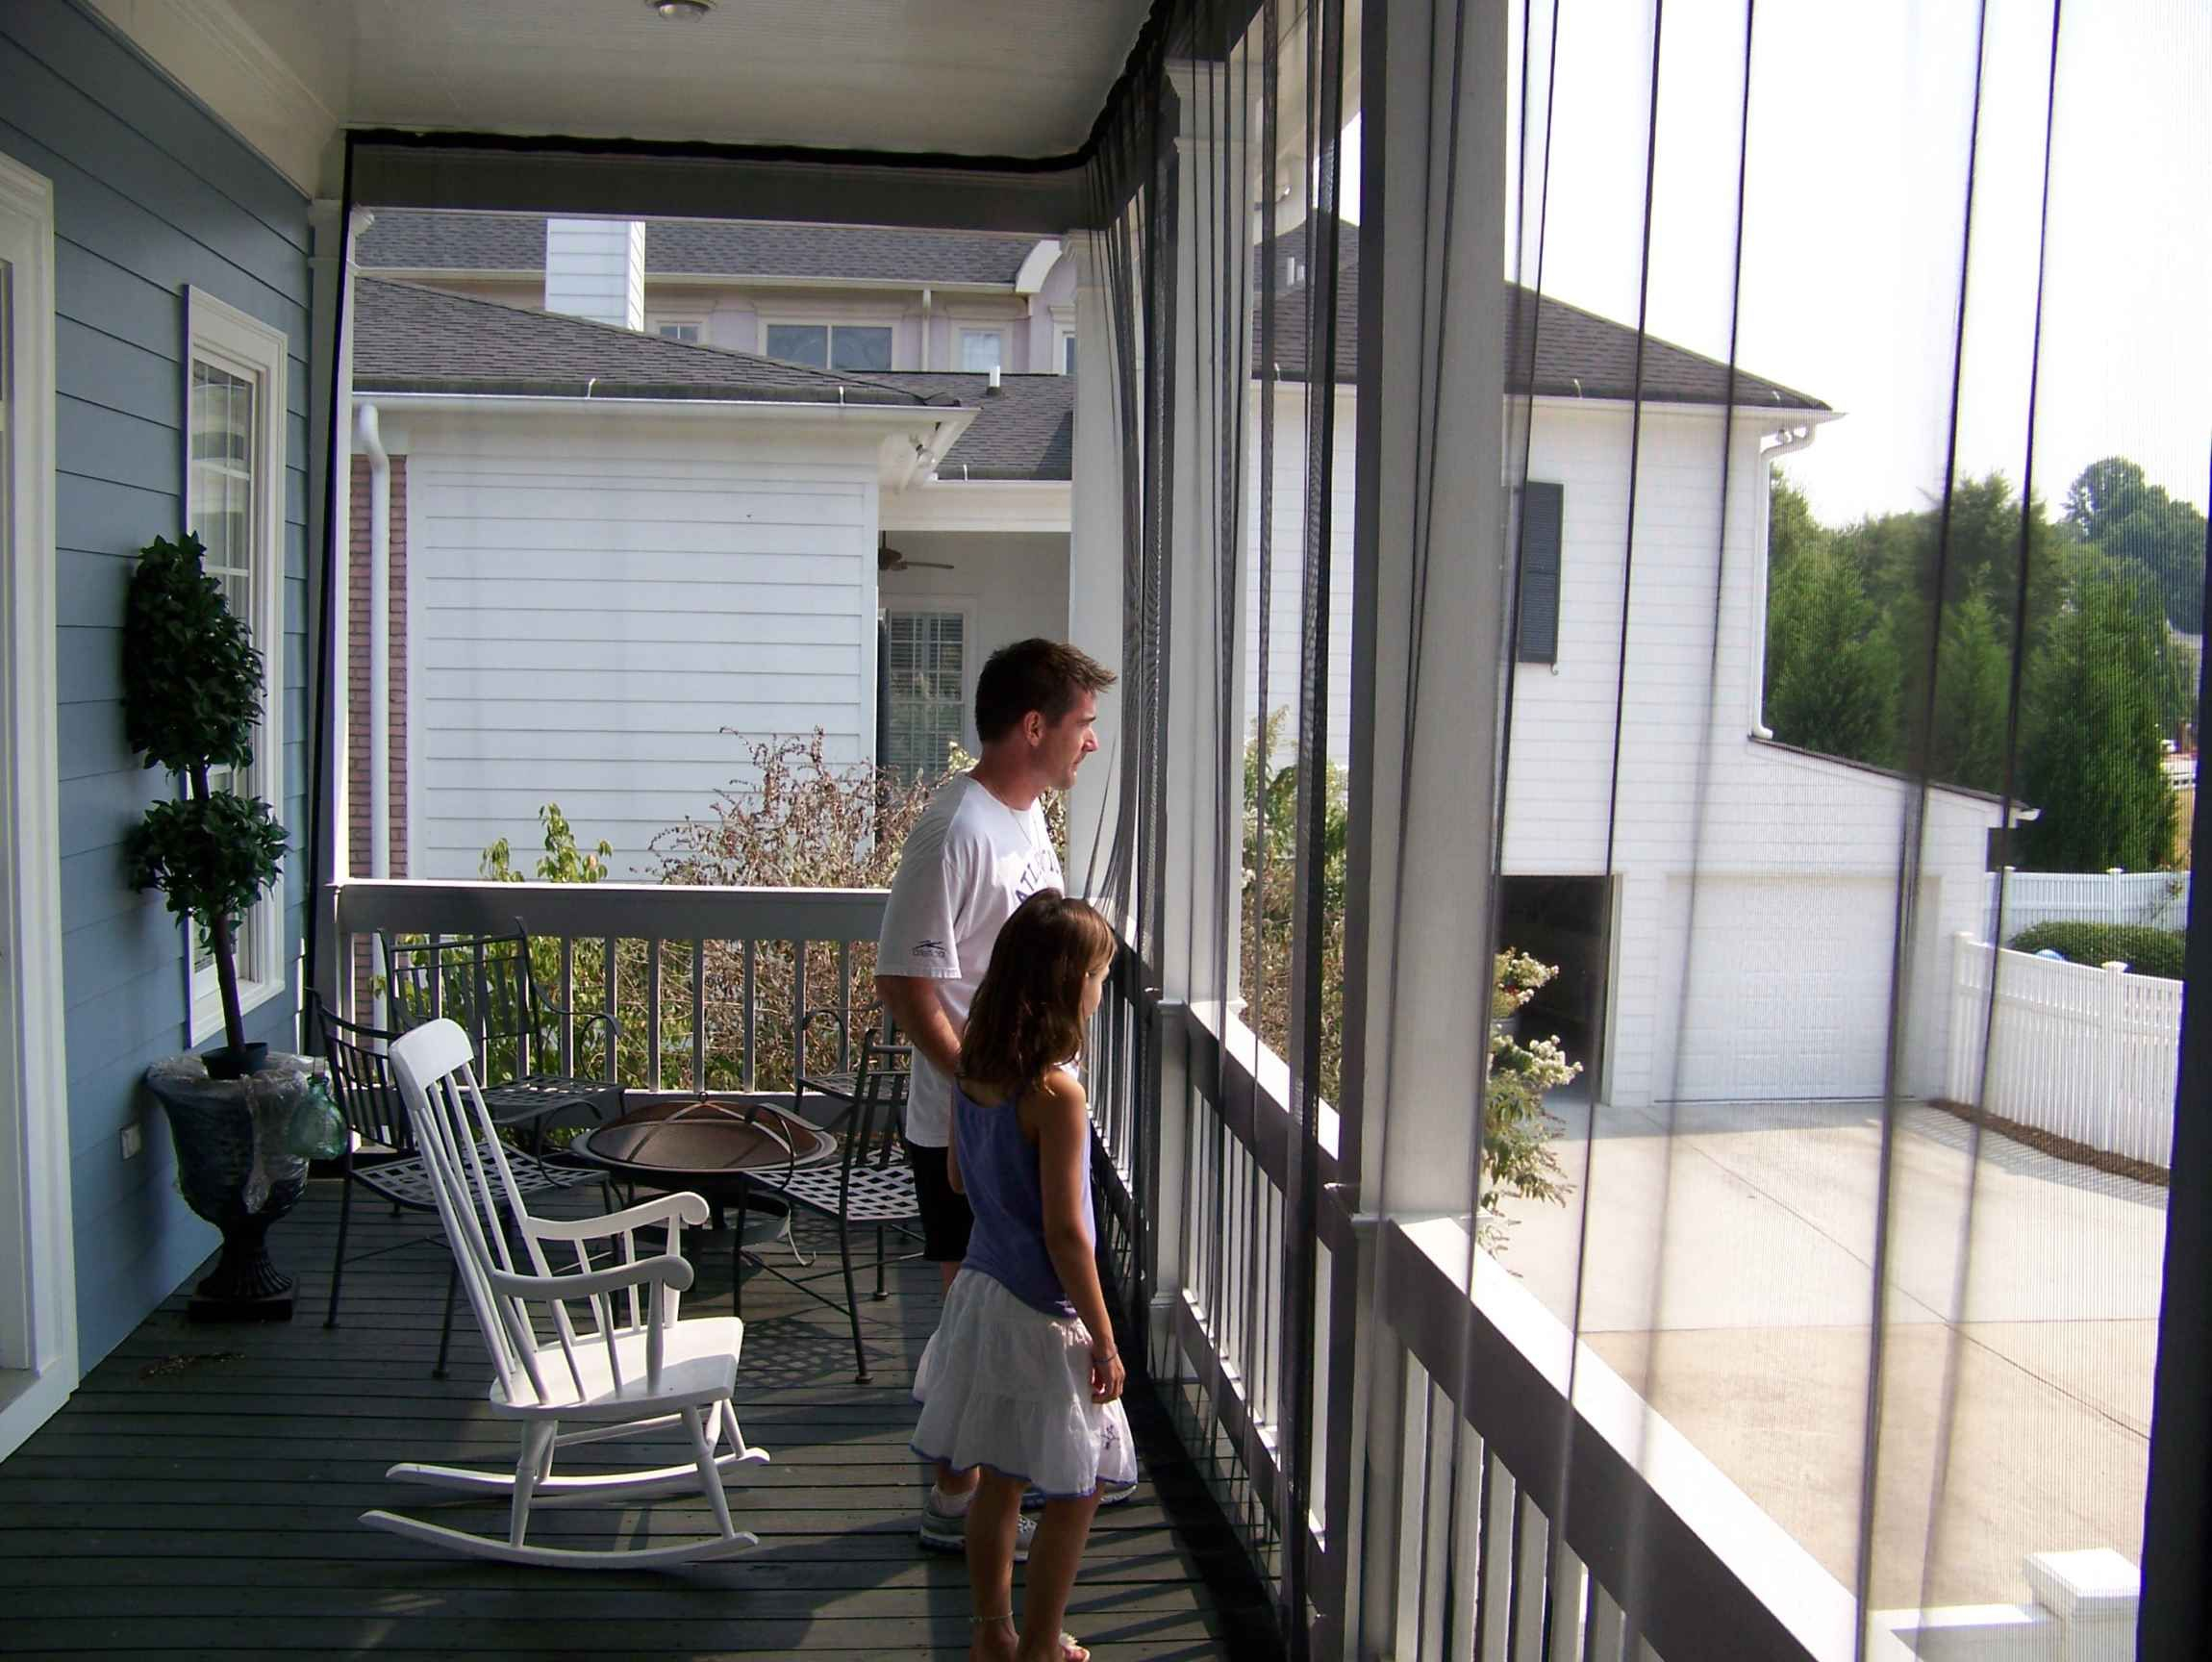 Mosquito Netting Mesh Curtains For The Balcony Want For The intended for sizing 2300 X 1728